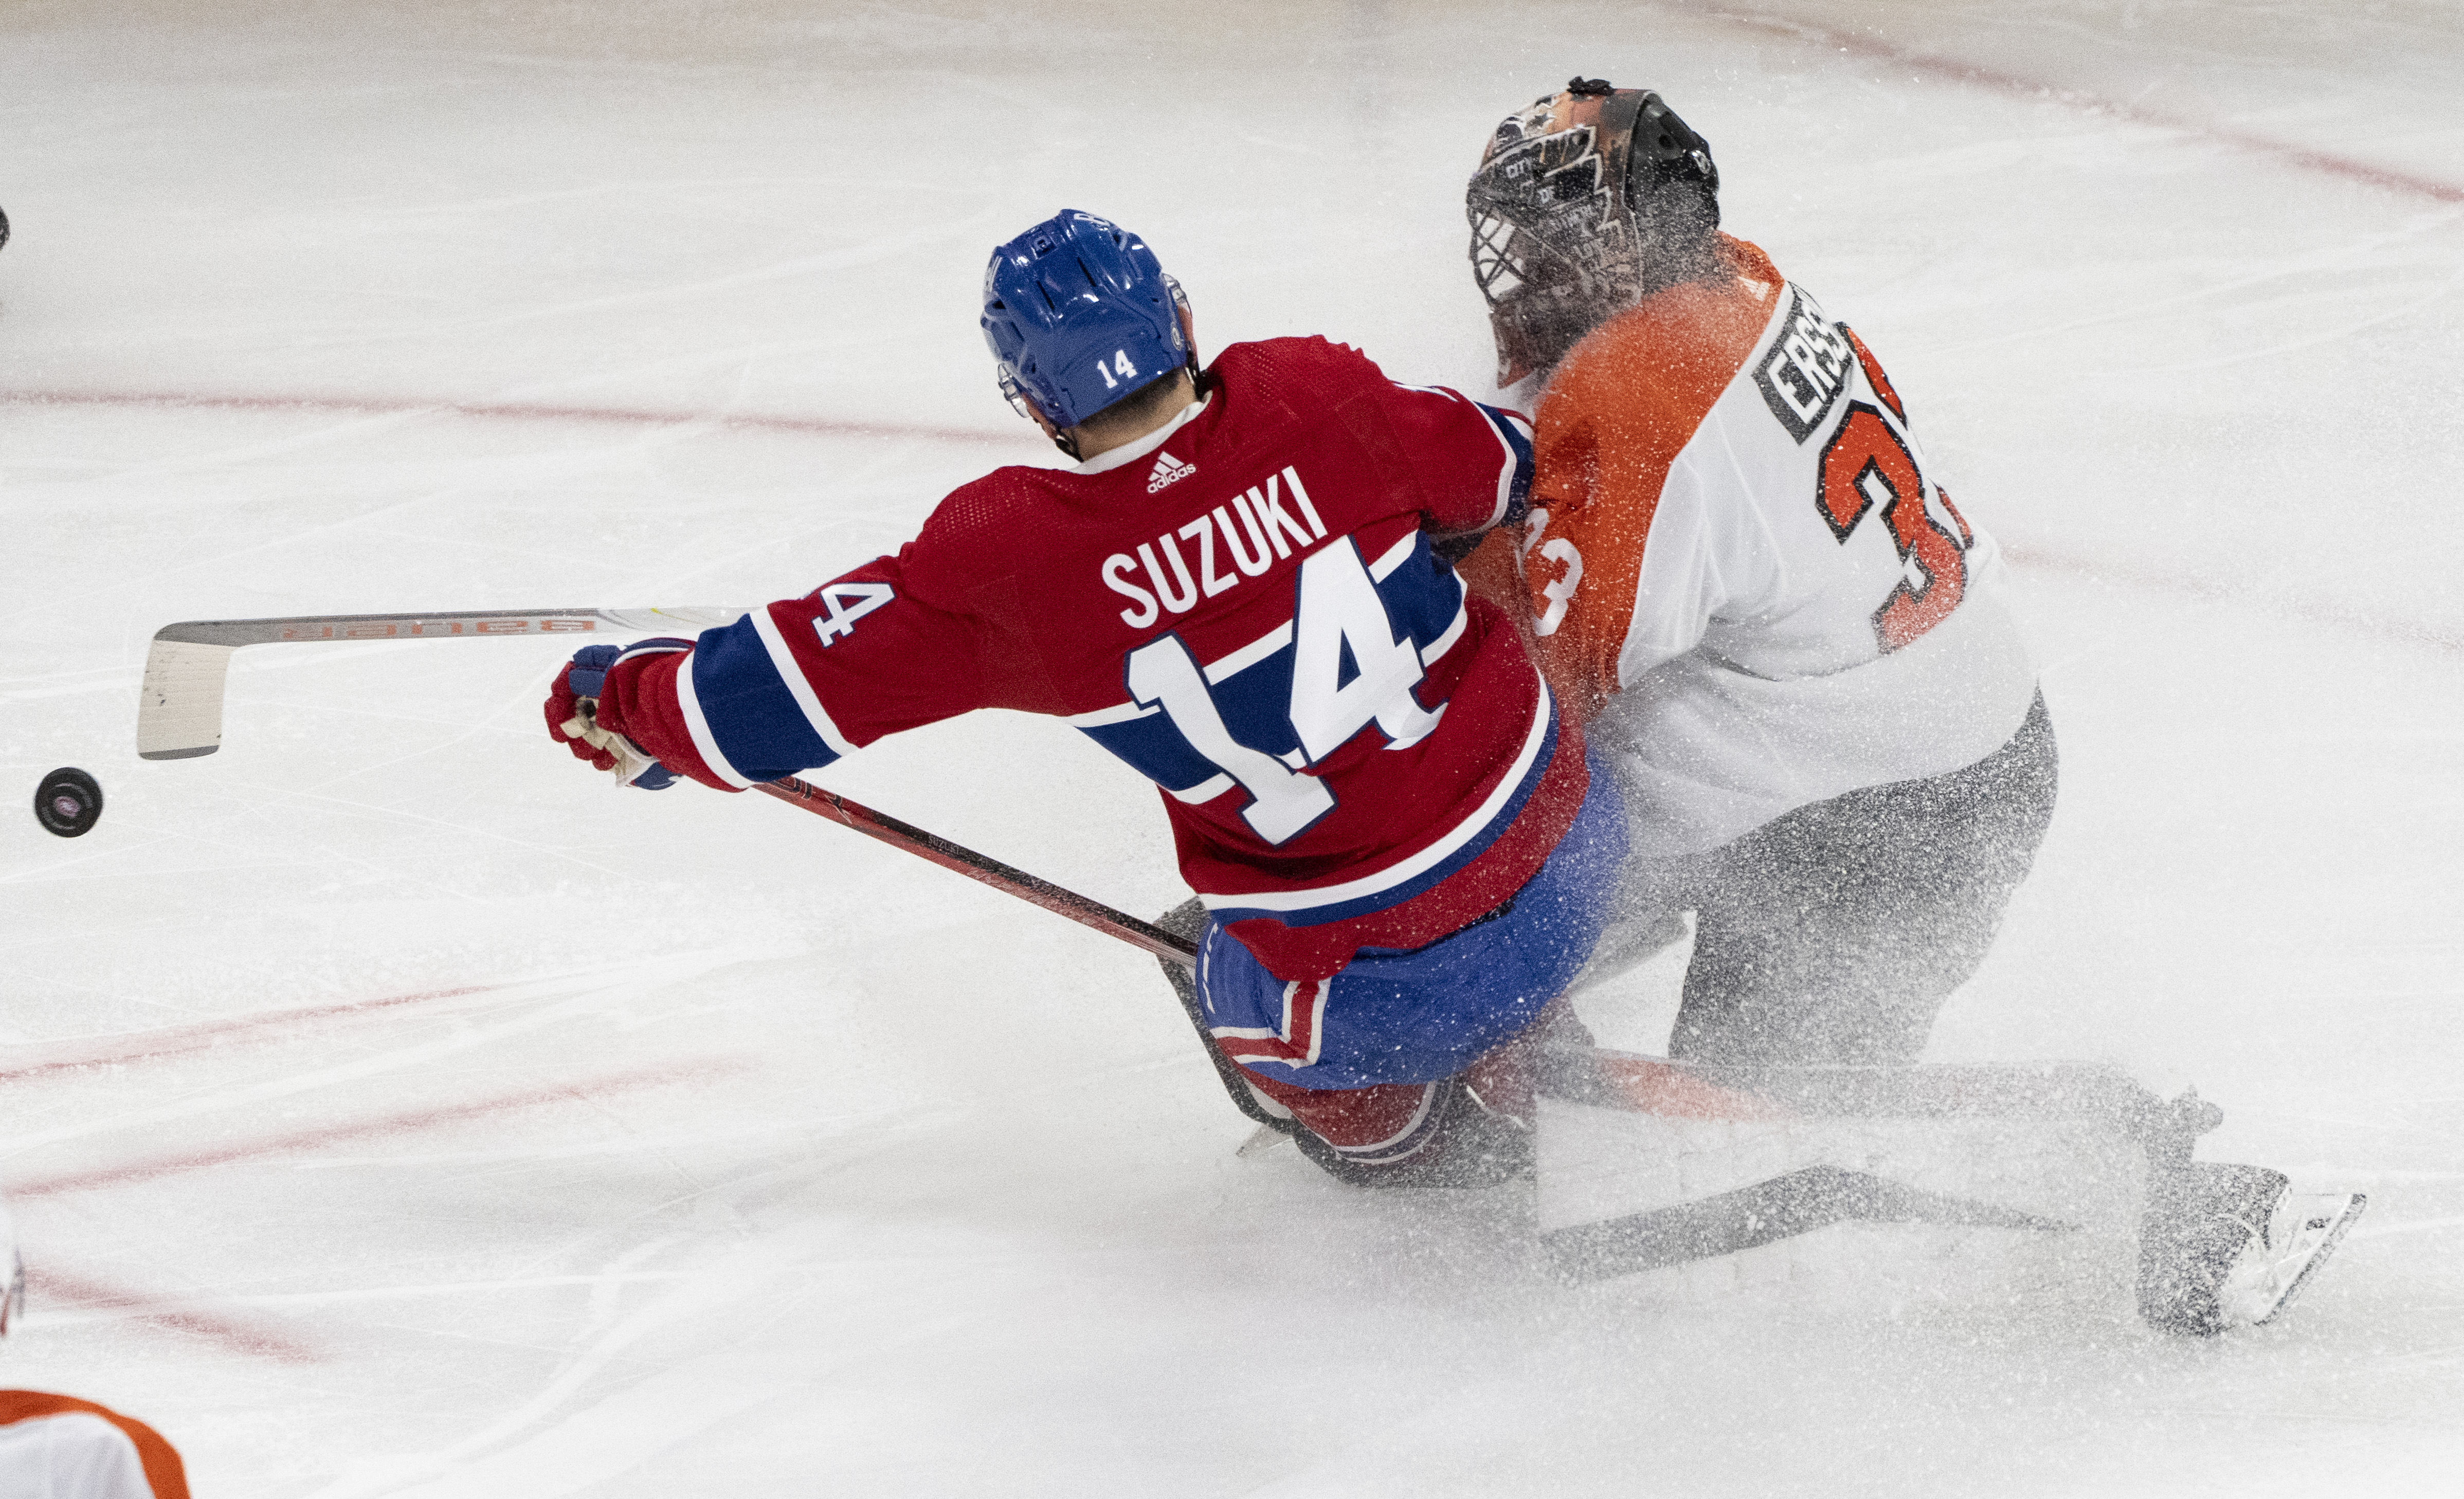 Call of the Wilde: Montreal Canadiens’ win streak hits 3 with home ice victory over Flyers